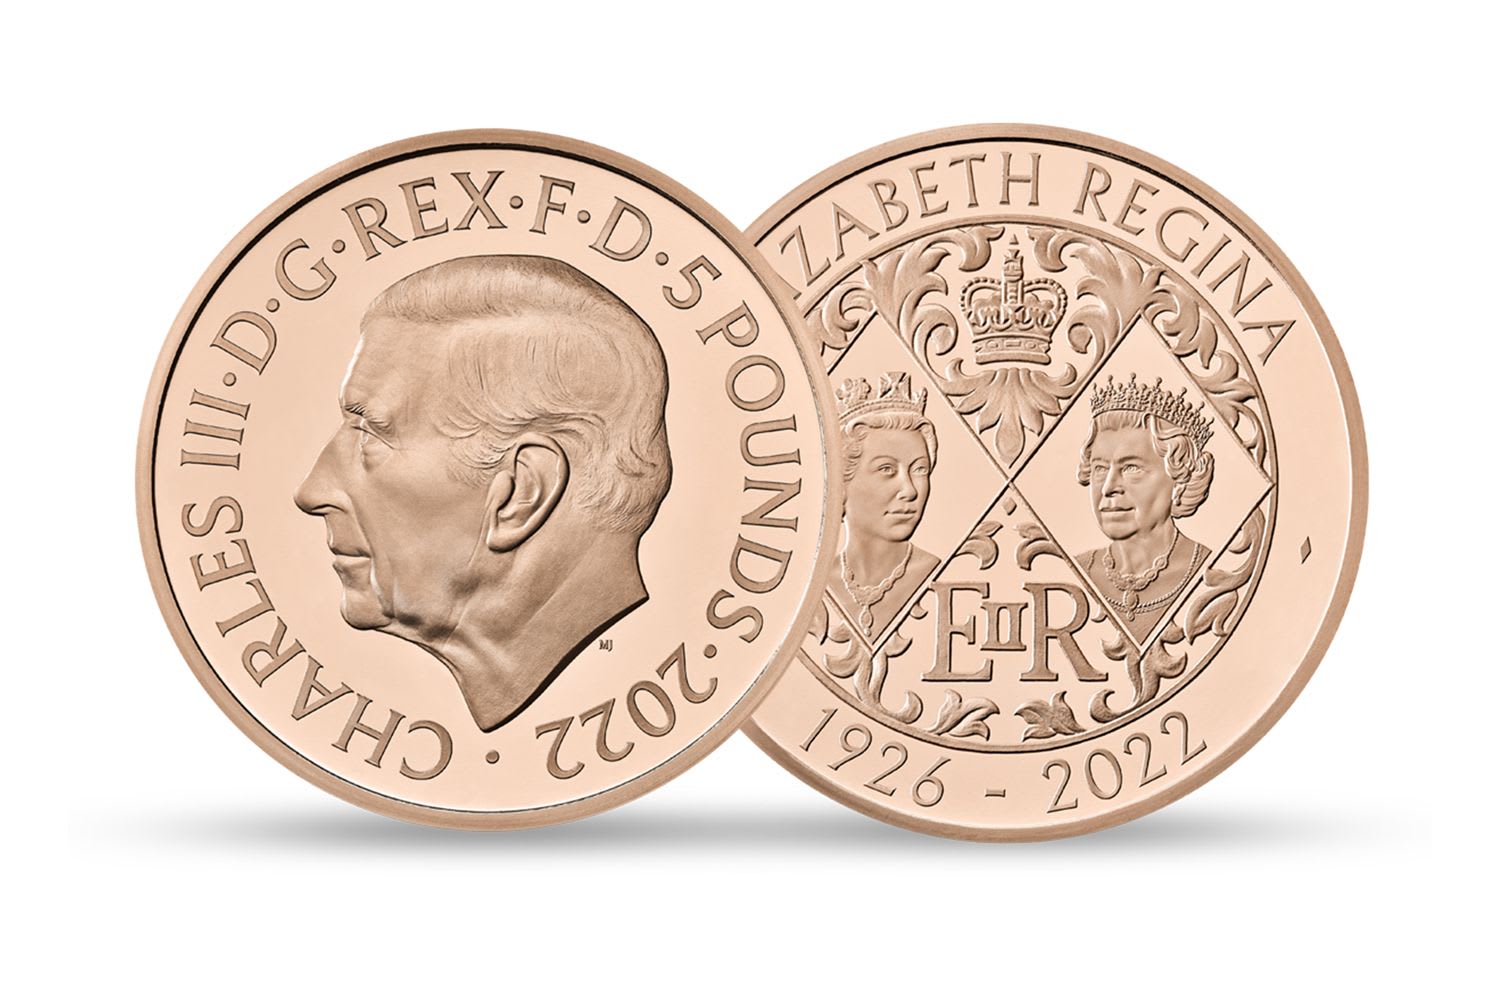 New coins featuring King Charles III's portrait revealed